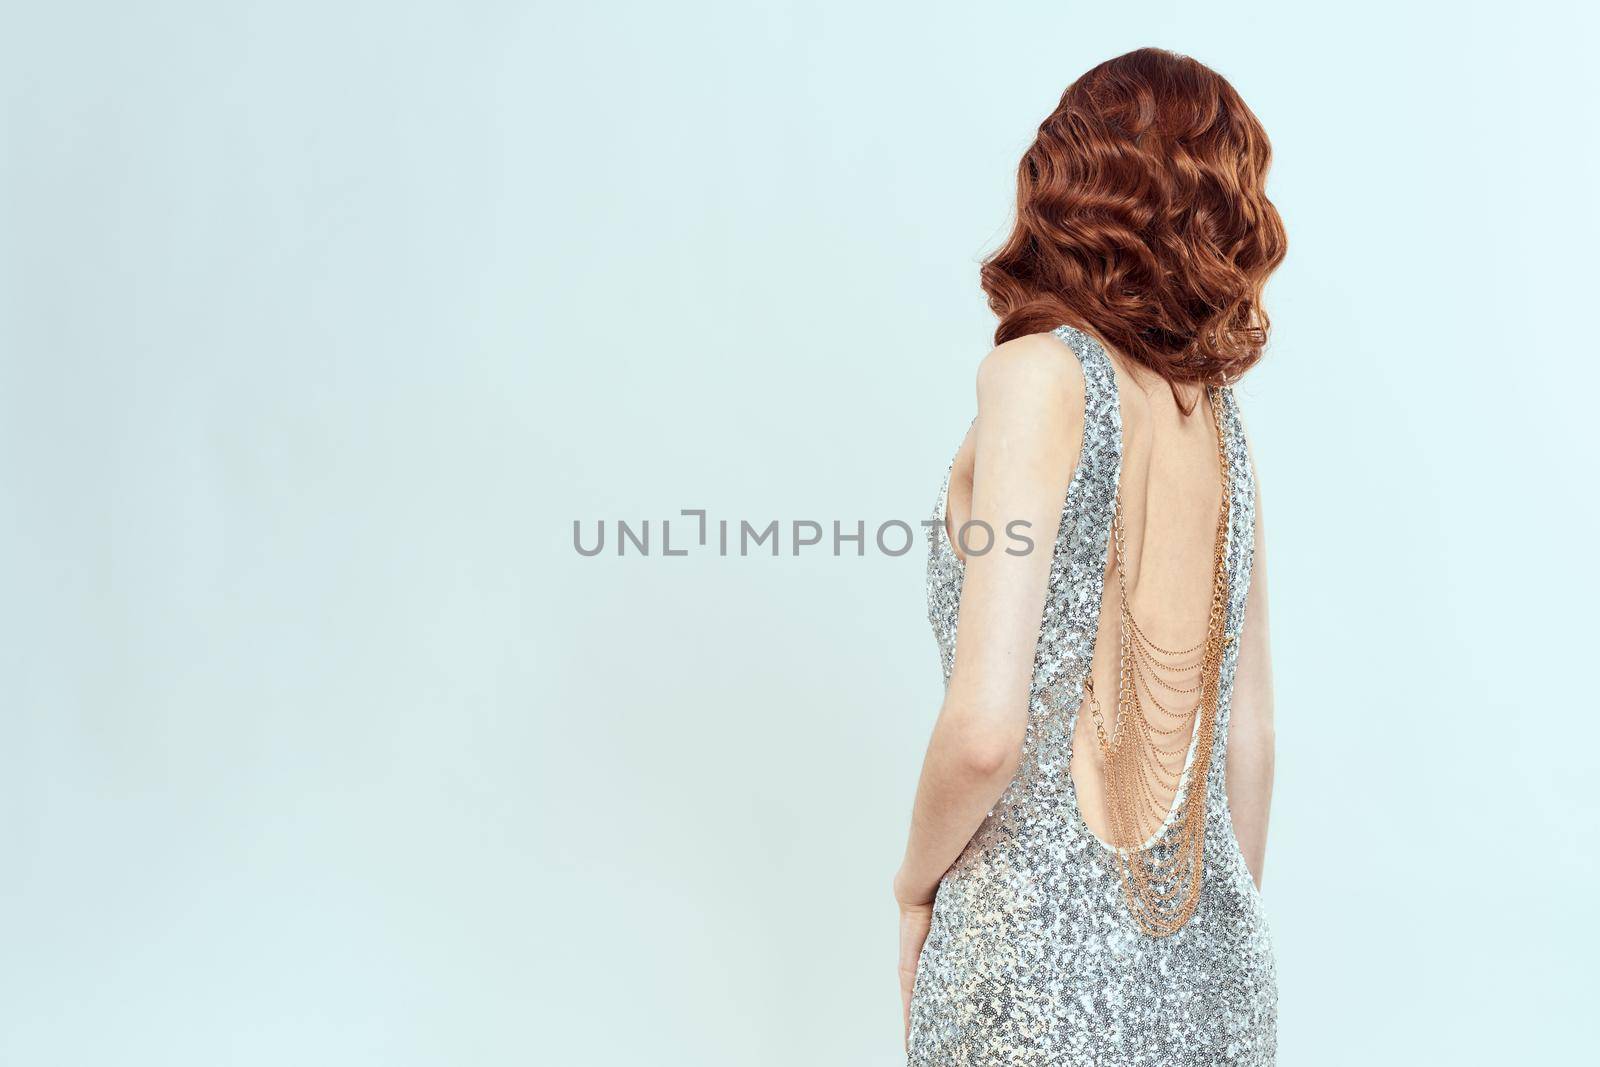 woman silver dress fashionable hairstyle from behind posing beauty. High quality photo